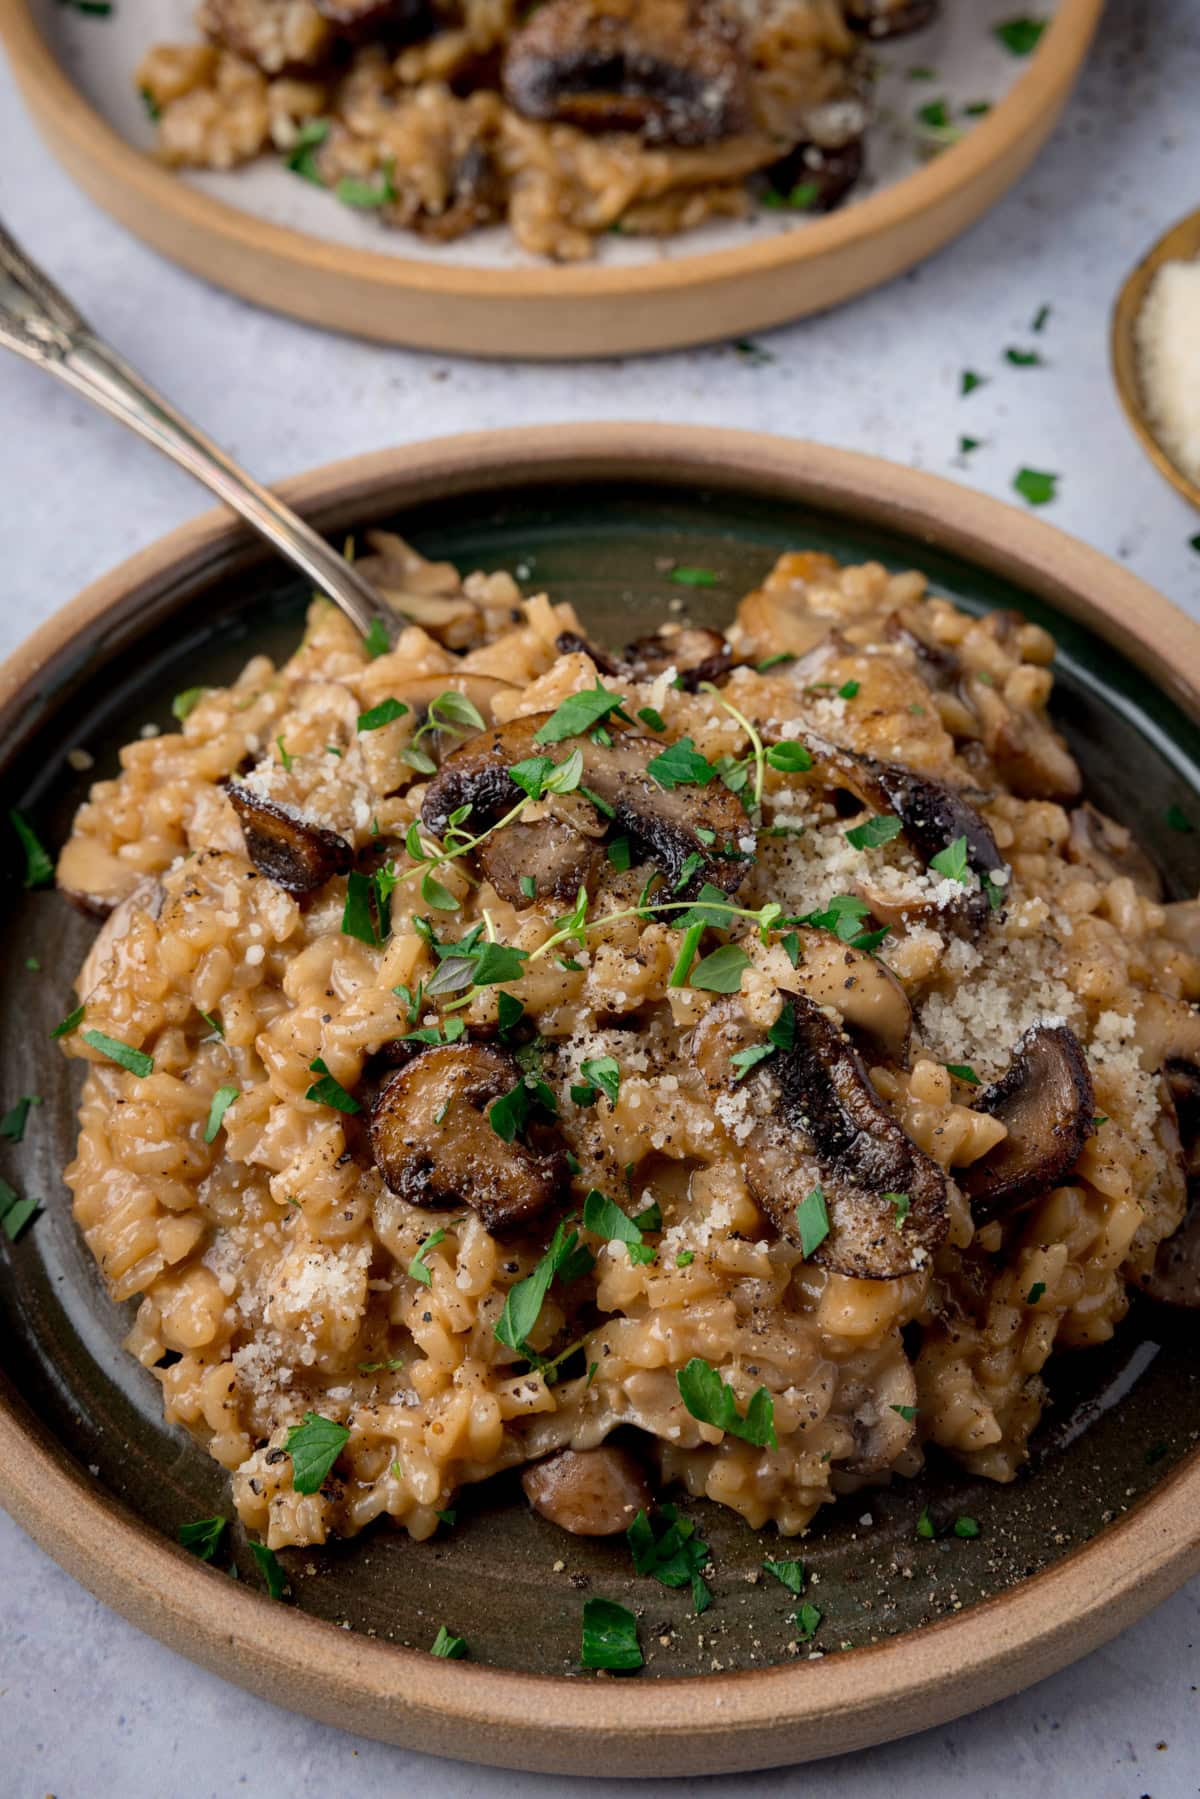 A tall image of Mushroom Risotto. In the centre of the image there is a dark green dish with a brown rim, which contains a portion of Mushroom Risotto, topped with sprigs of thyme, parmesan and ground black pepper. There is a silver fork sticking out of the risotto. In the top of the background there is another plate of Mushroom Risotto, except this plate is white with a brown rim. On the right of the background, there is a gold dish of parmesan, with some parsley sprinkled around it. This is on a light grey surface.